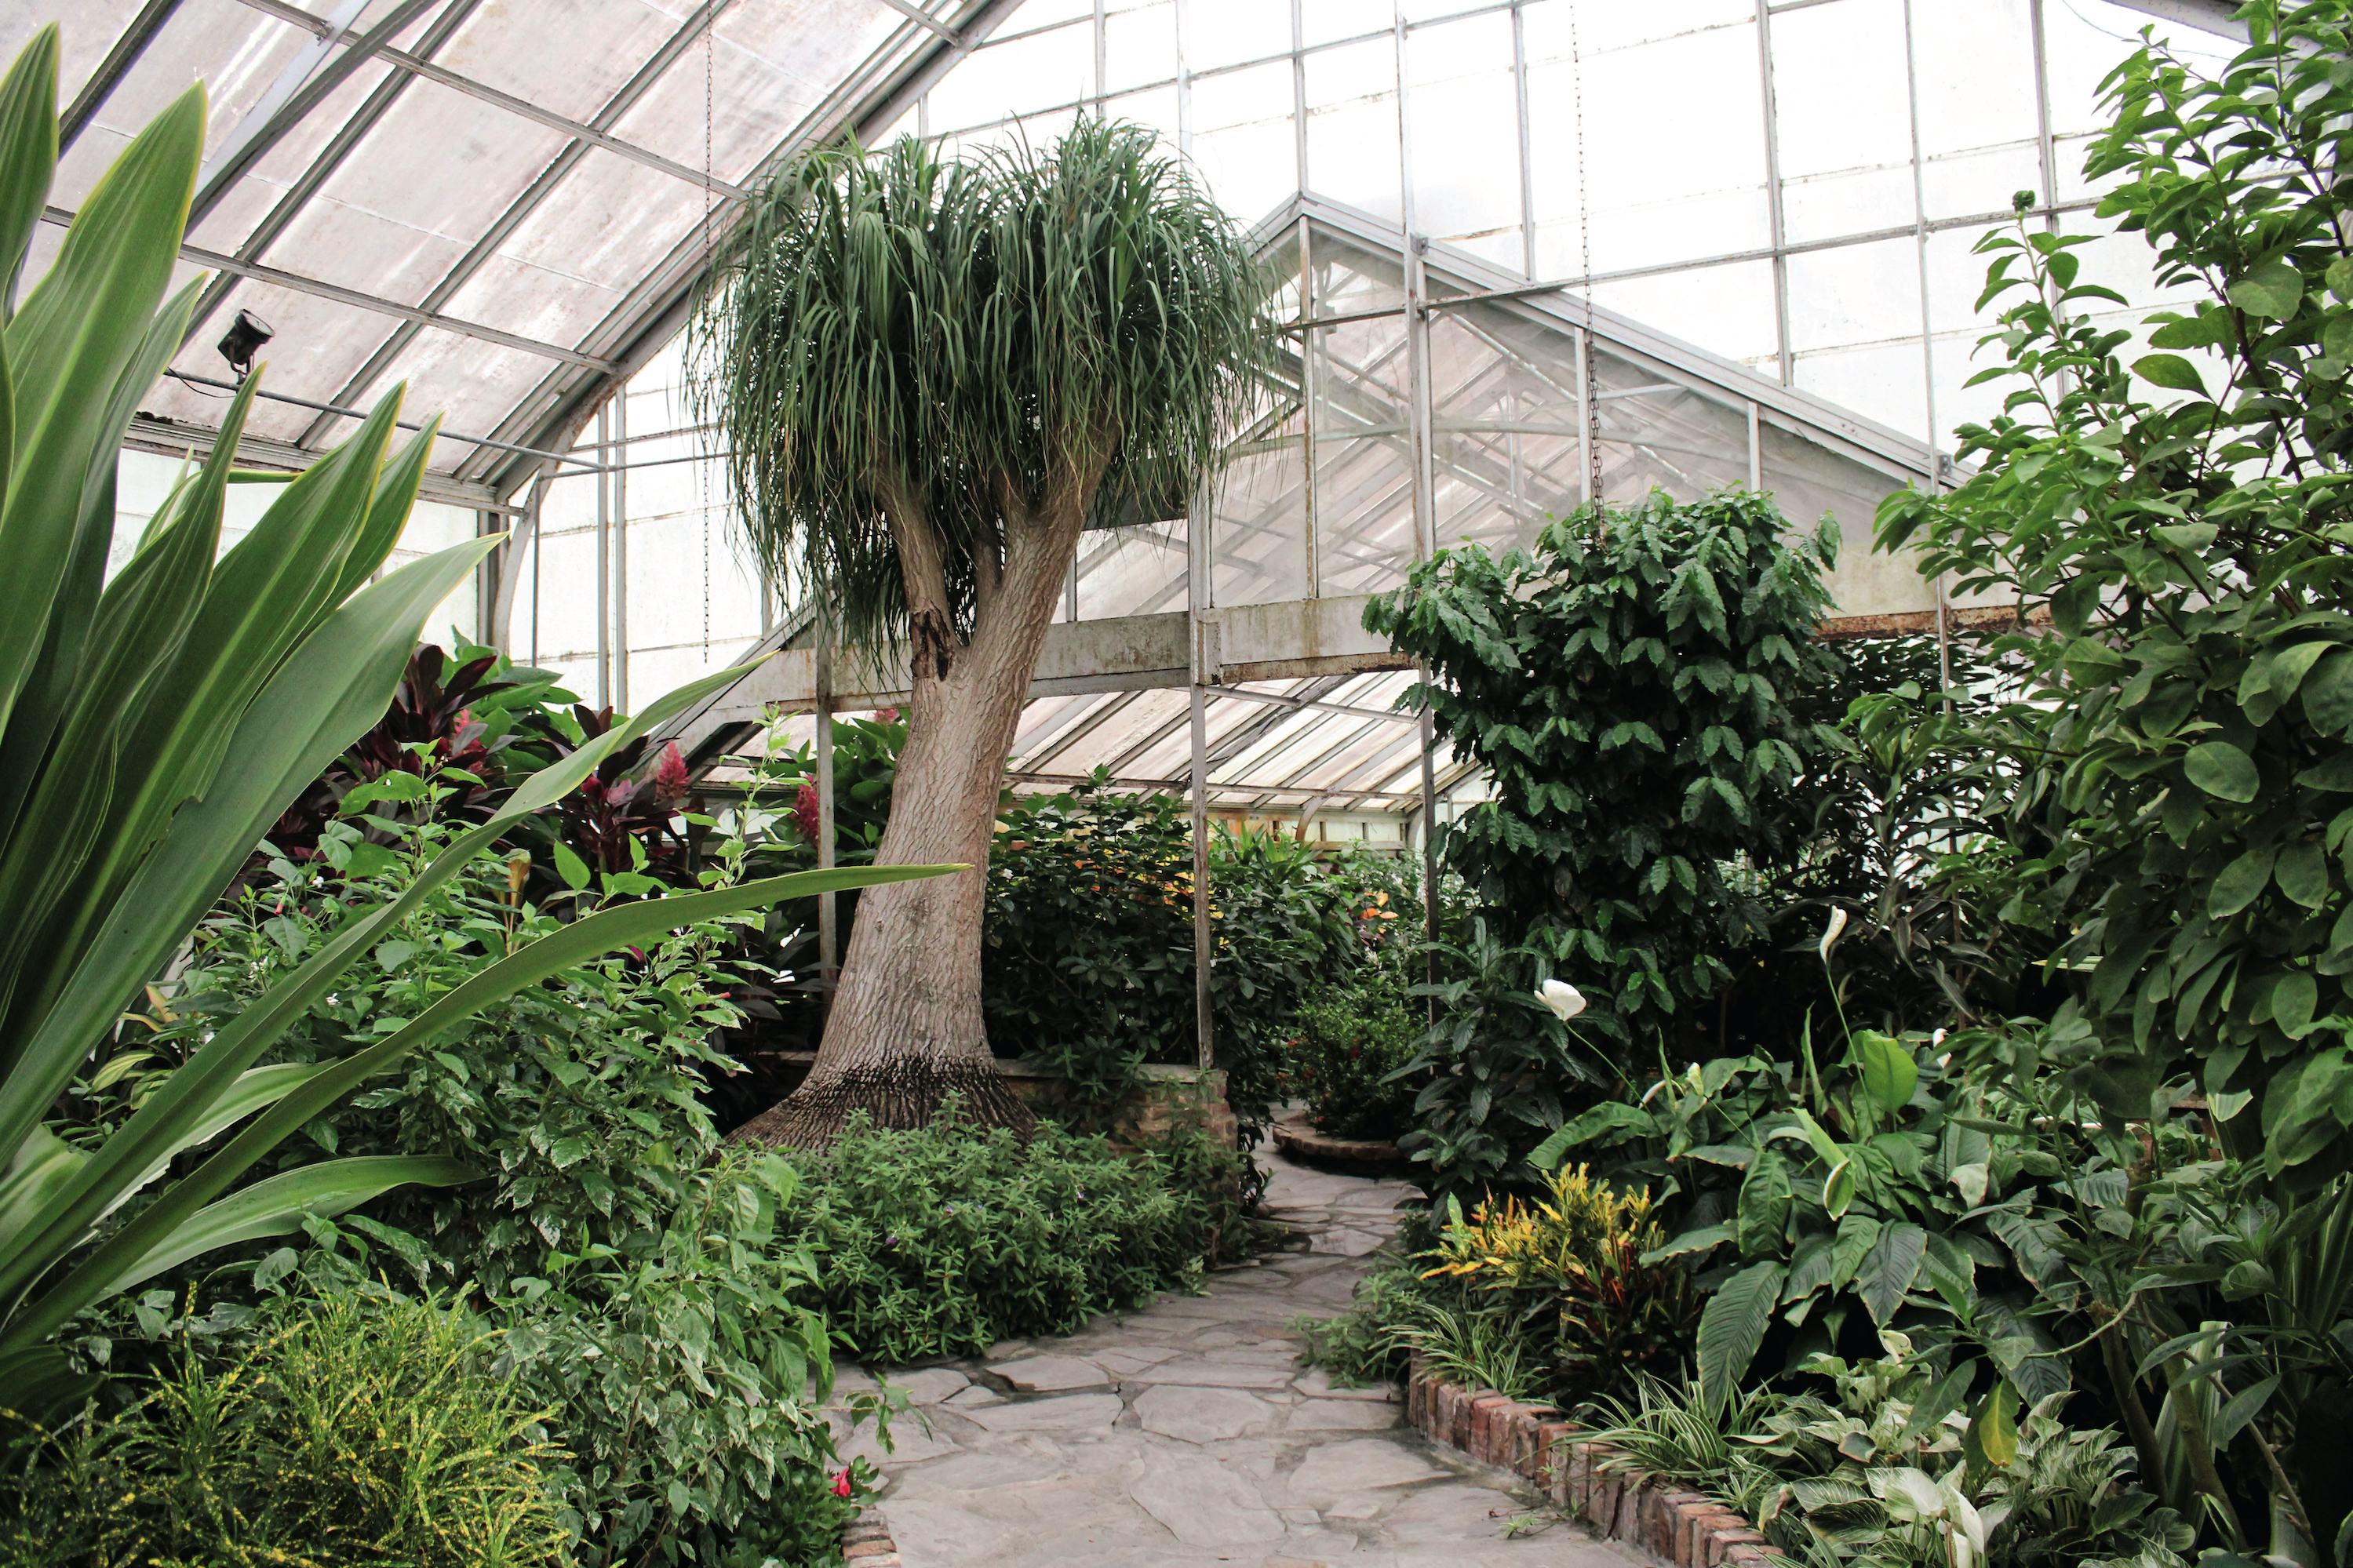 A ponytail palm inside a greenhouse with a stone path